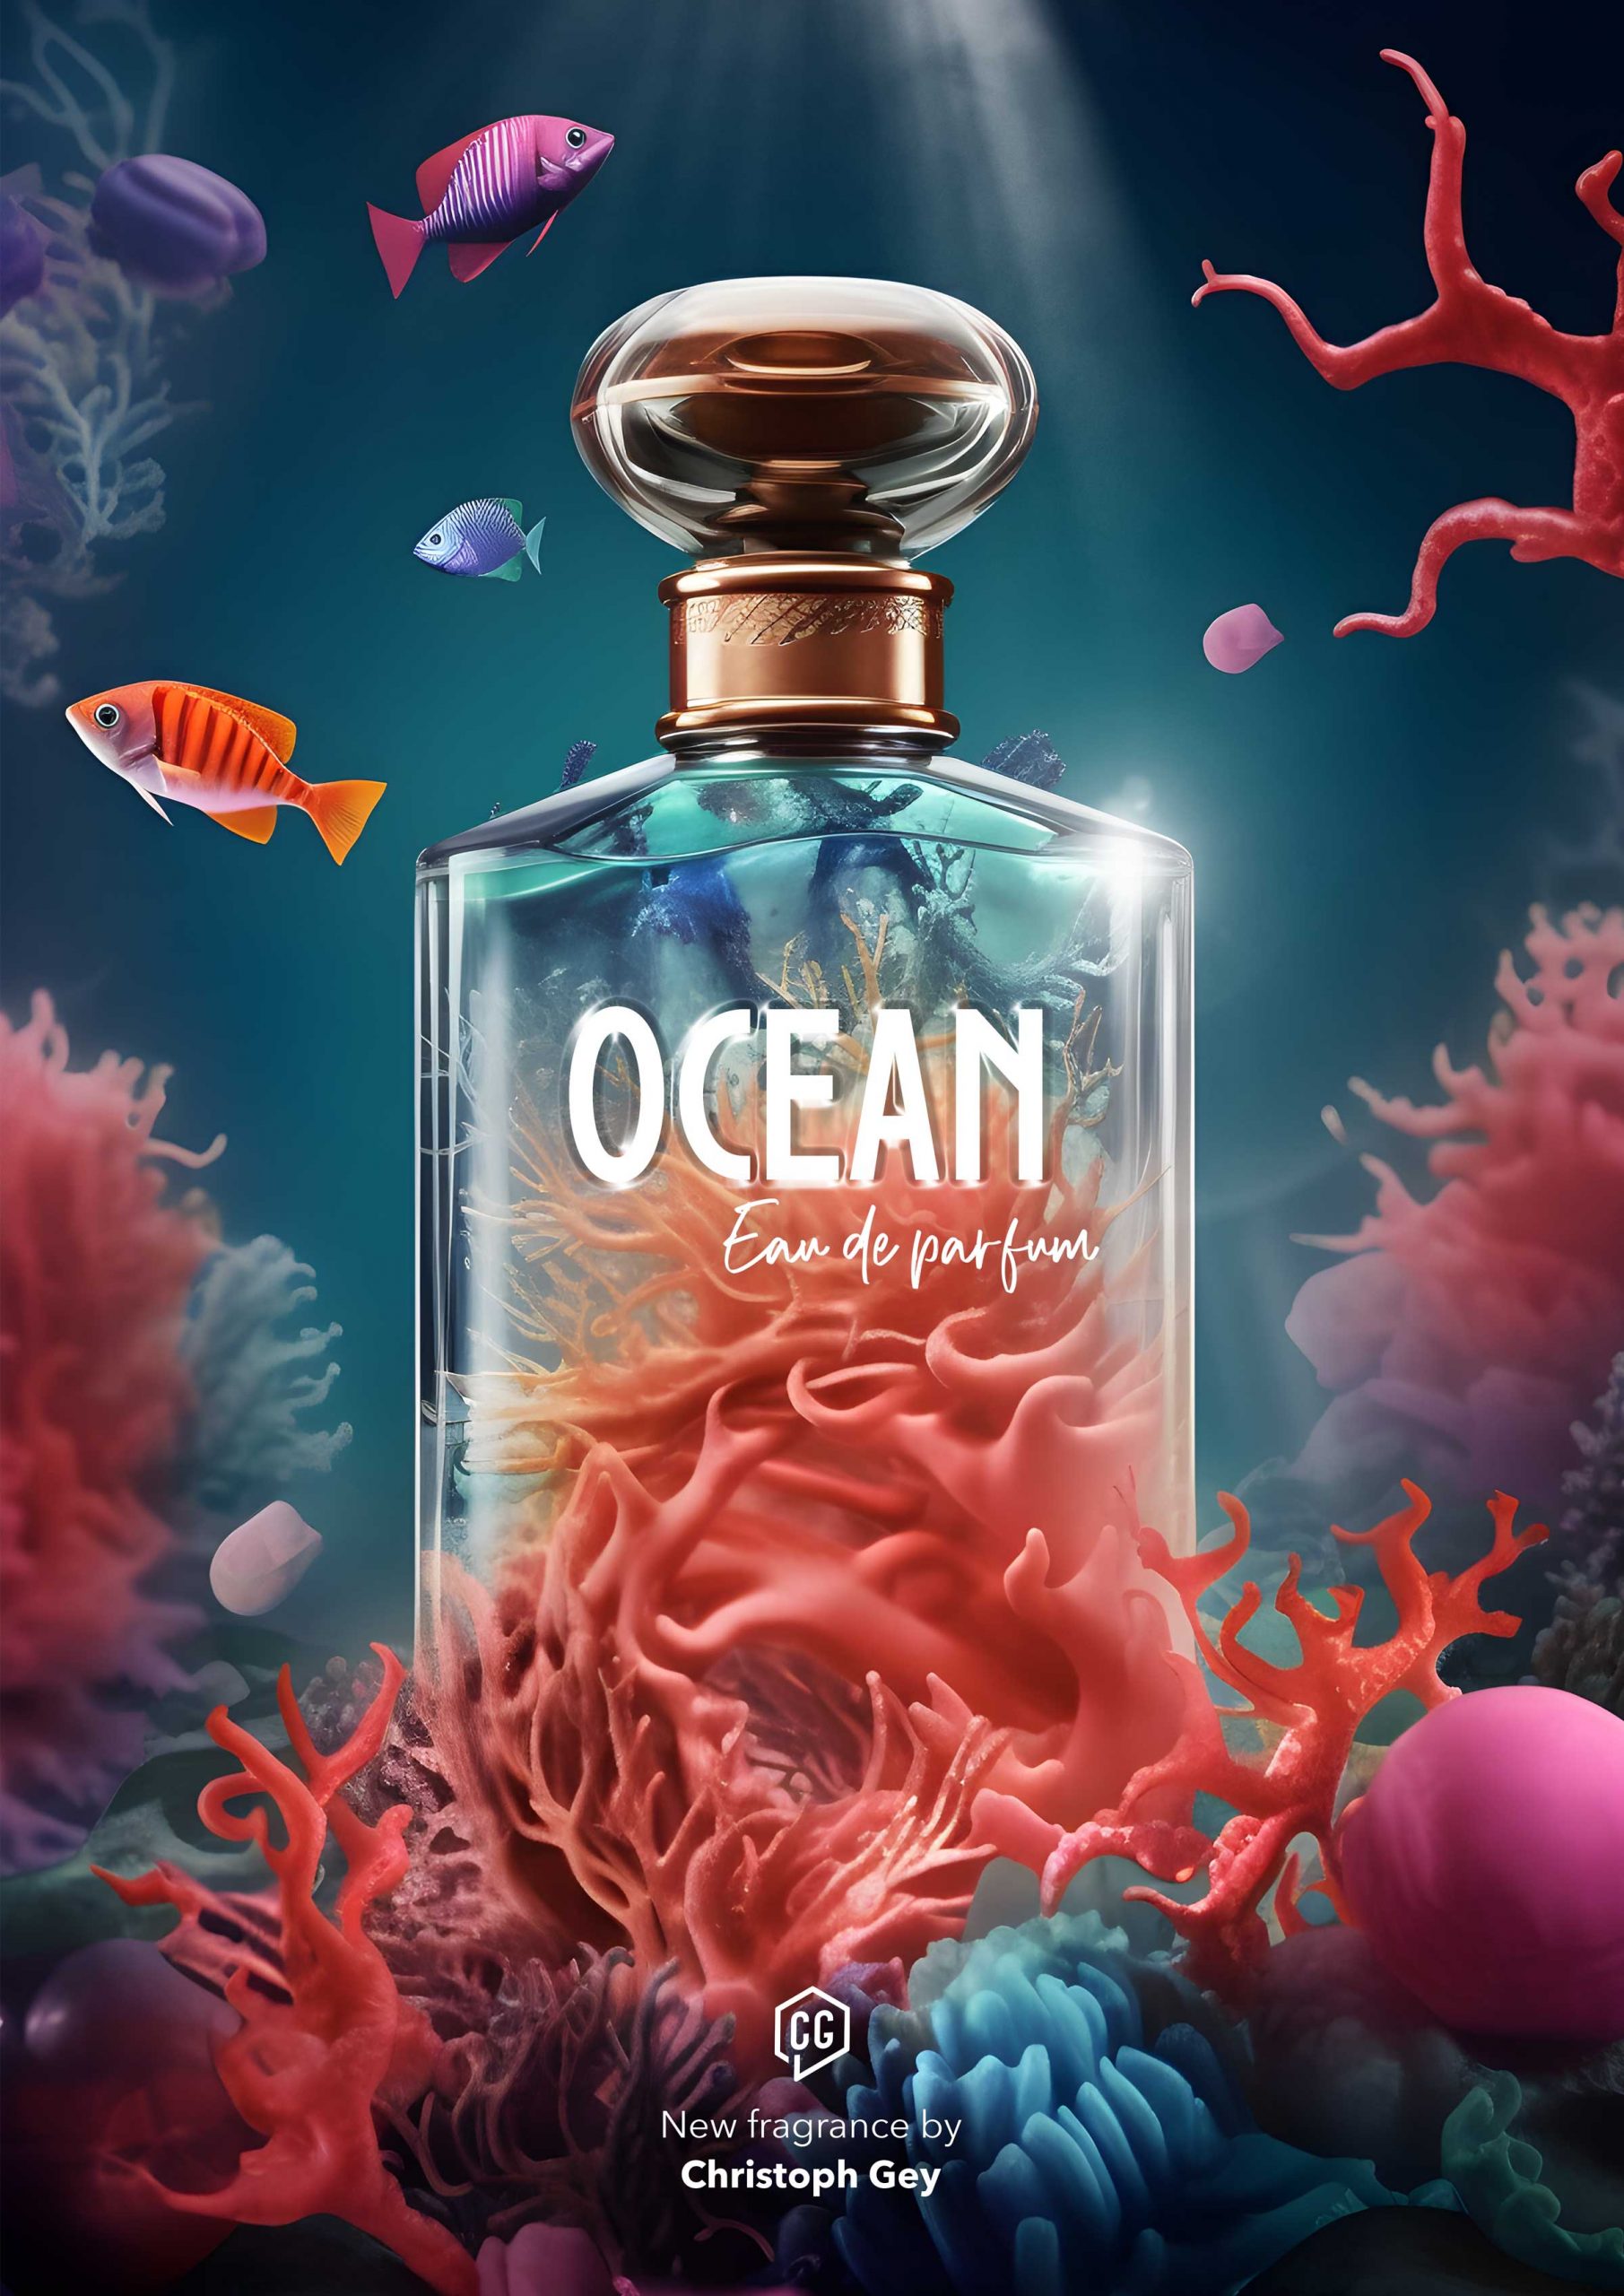 Ocean - Parfum Label Design and Advertising by the freelance art director UI/UX Designer, graphic designer and illustrator Christoph Gey from Leipzig, Germany.